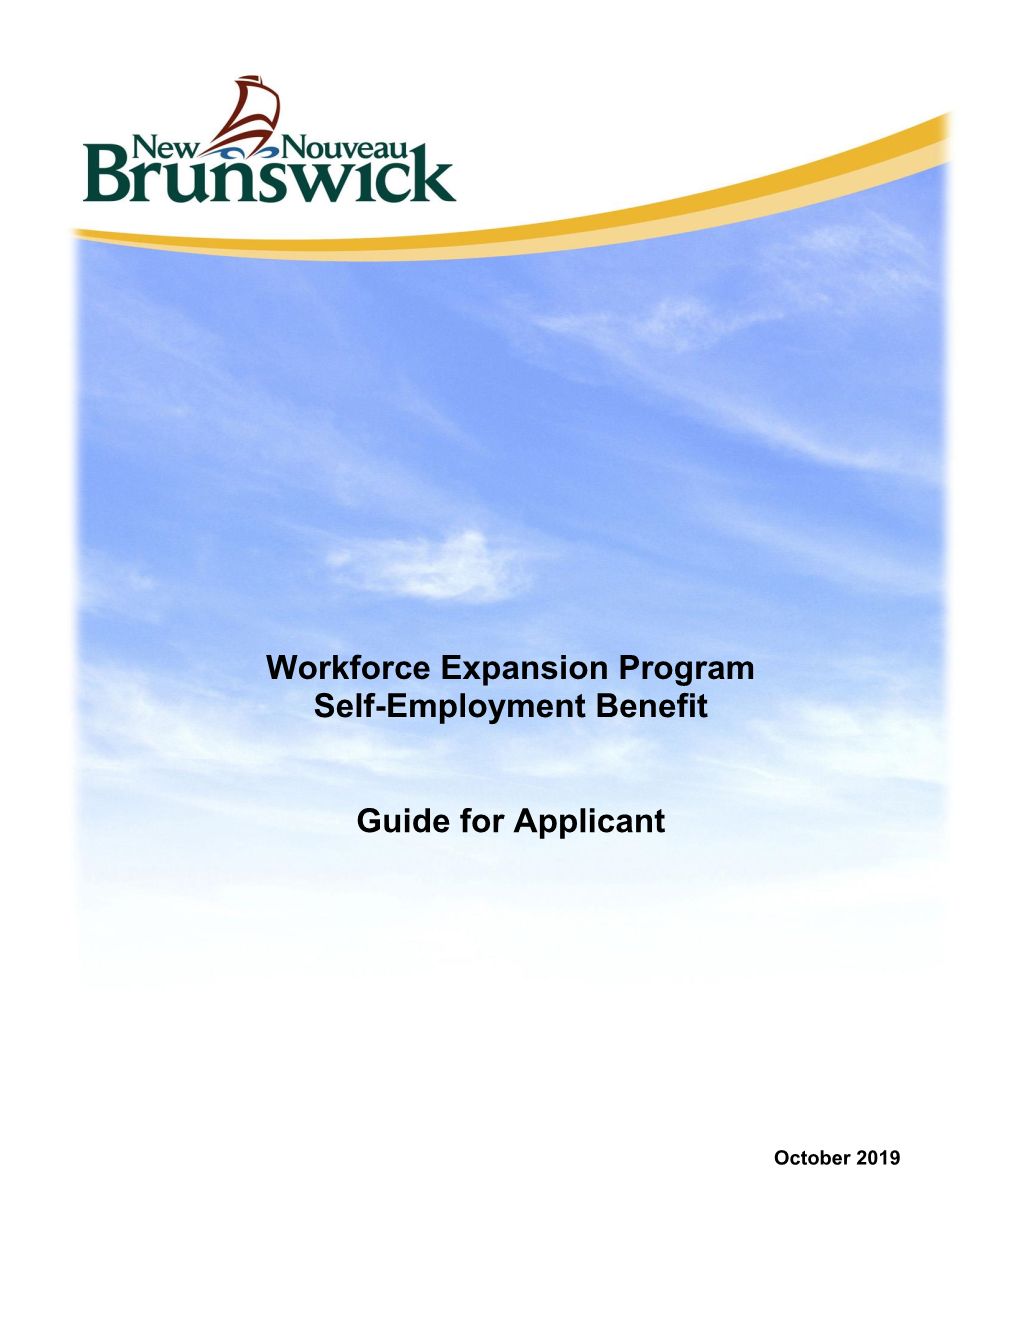 Workforce Expansion Program Self-Employment Benefit Guide For